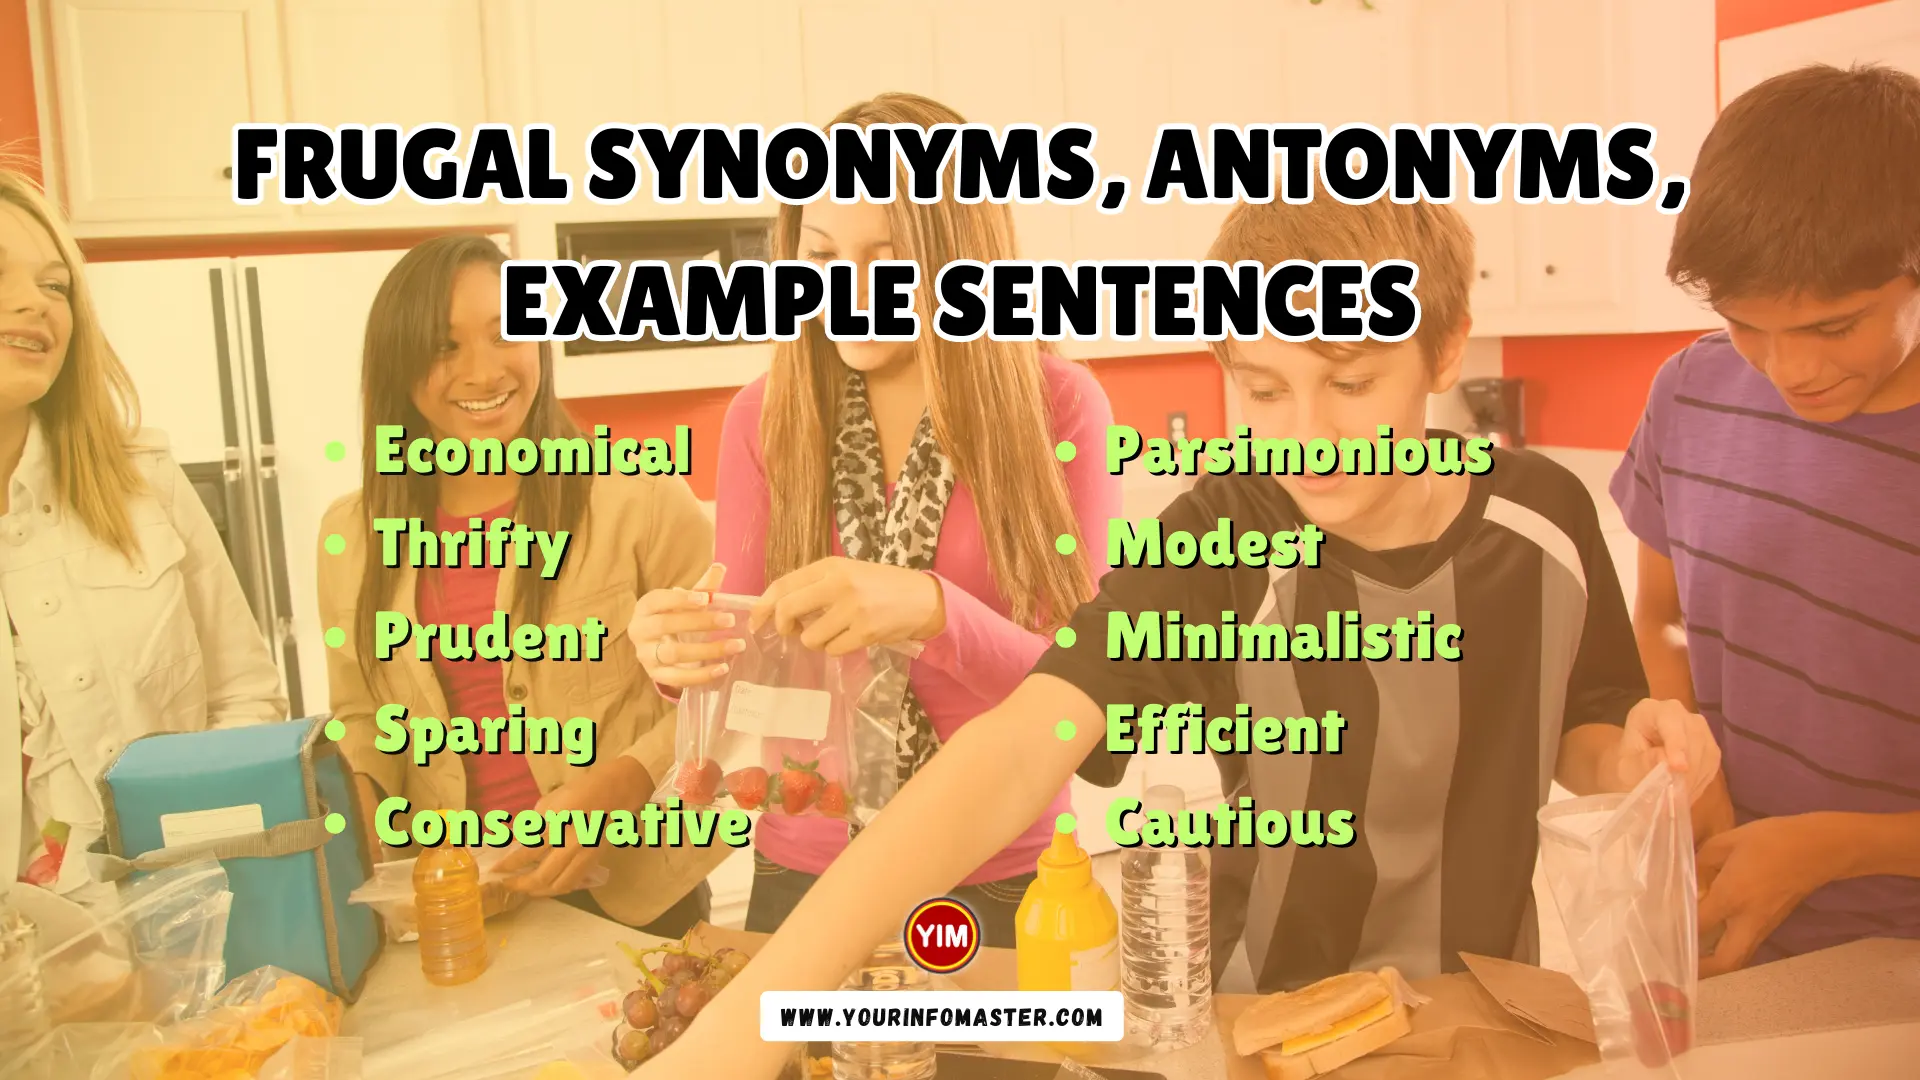 Frugal Synonyms, Antonyms, Example Sentences